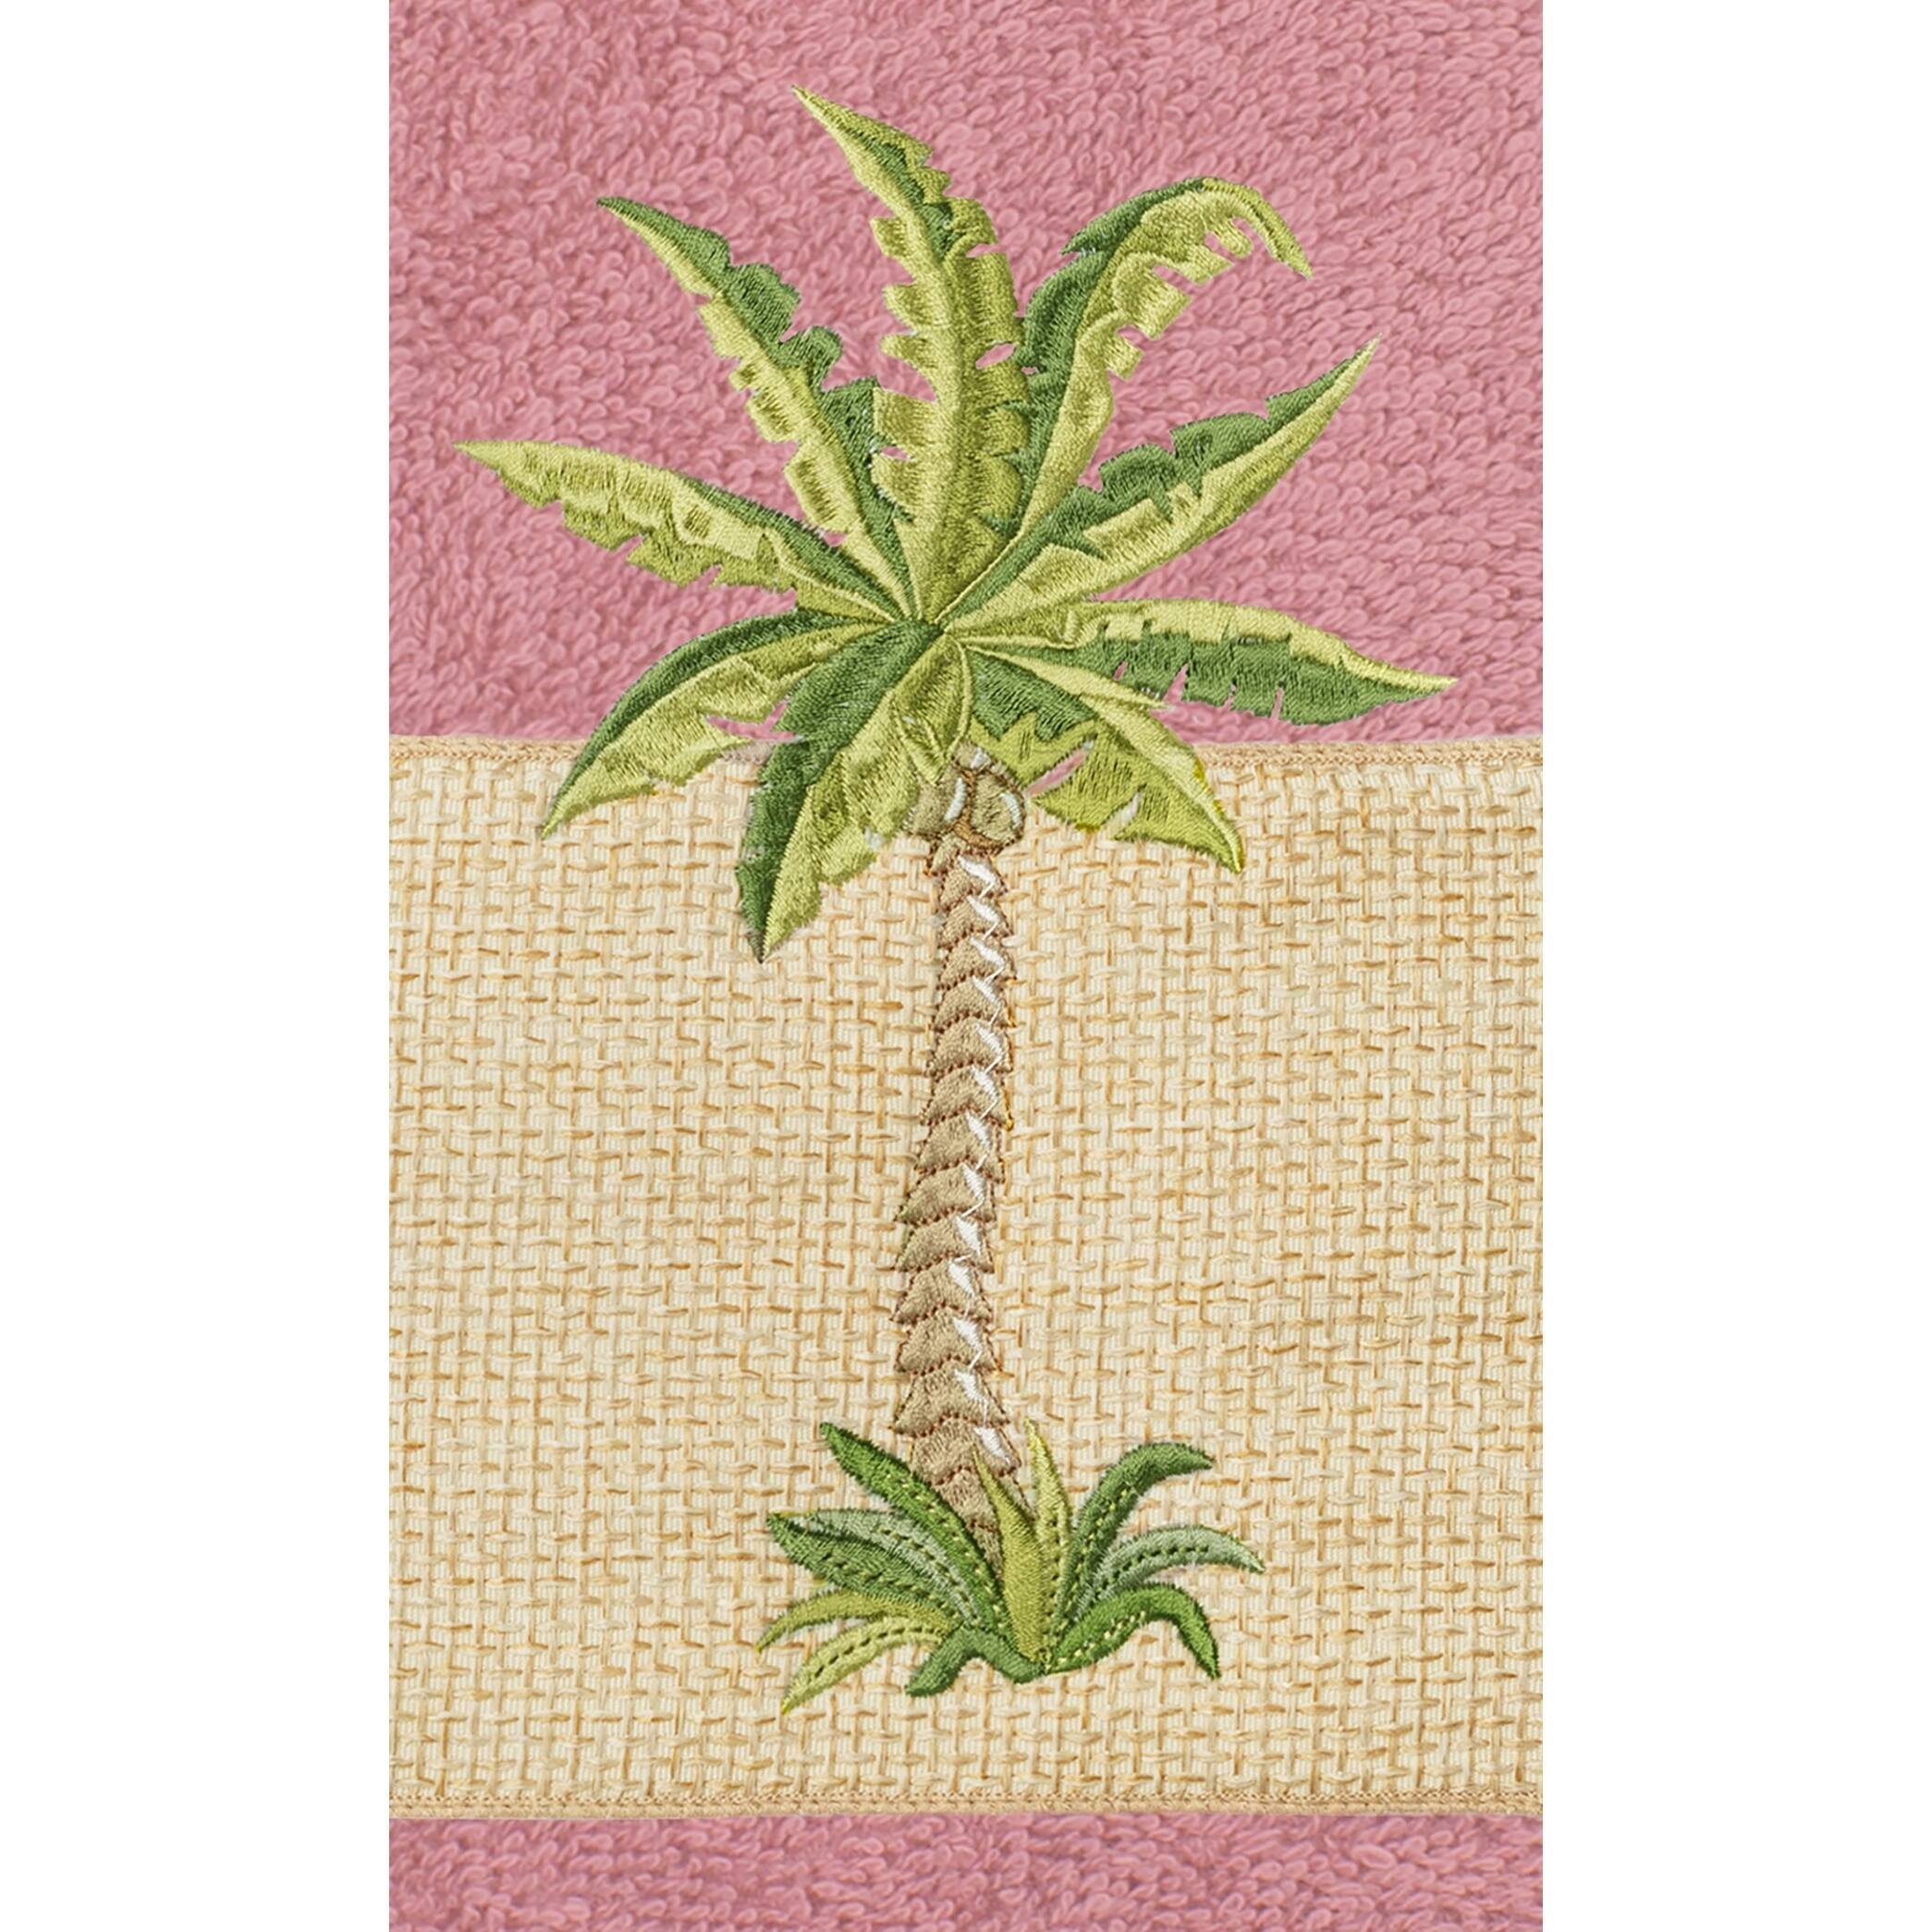 Authentic Hotel and Spa Turkish Cotton Palm Tree Embroidered Tea Rose Hand Towels (Set of 2)